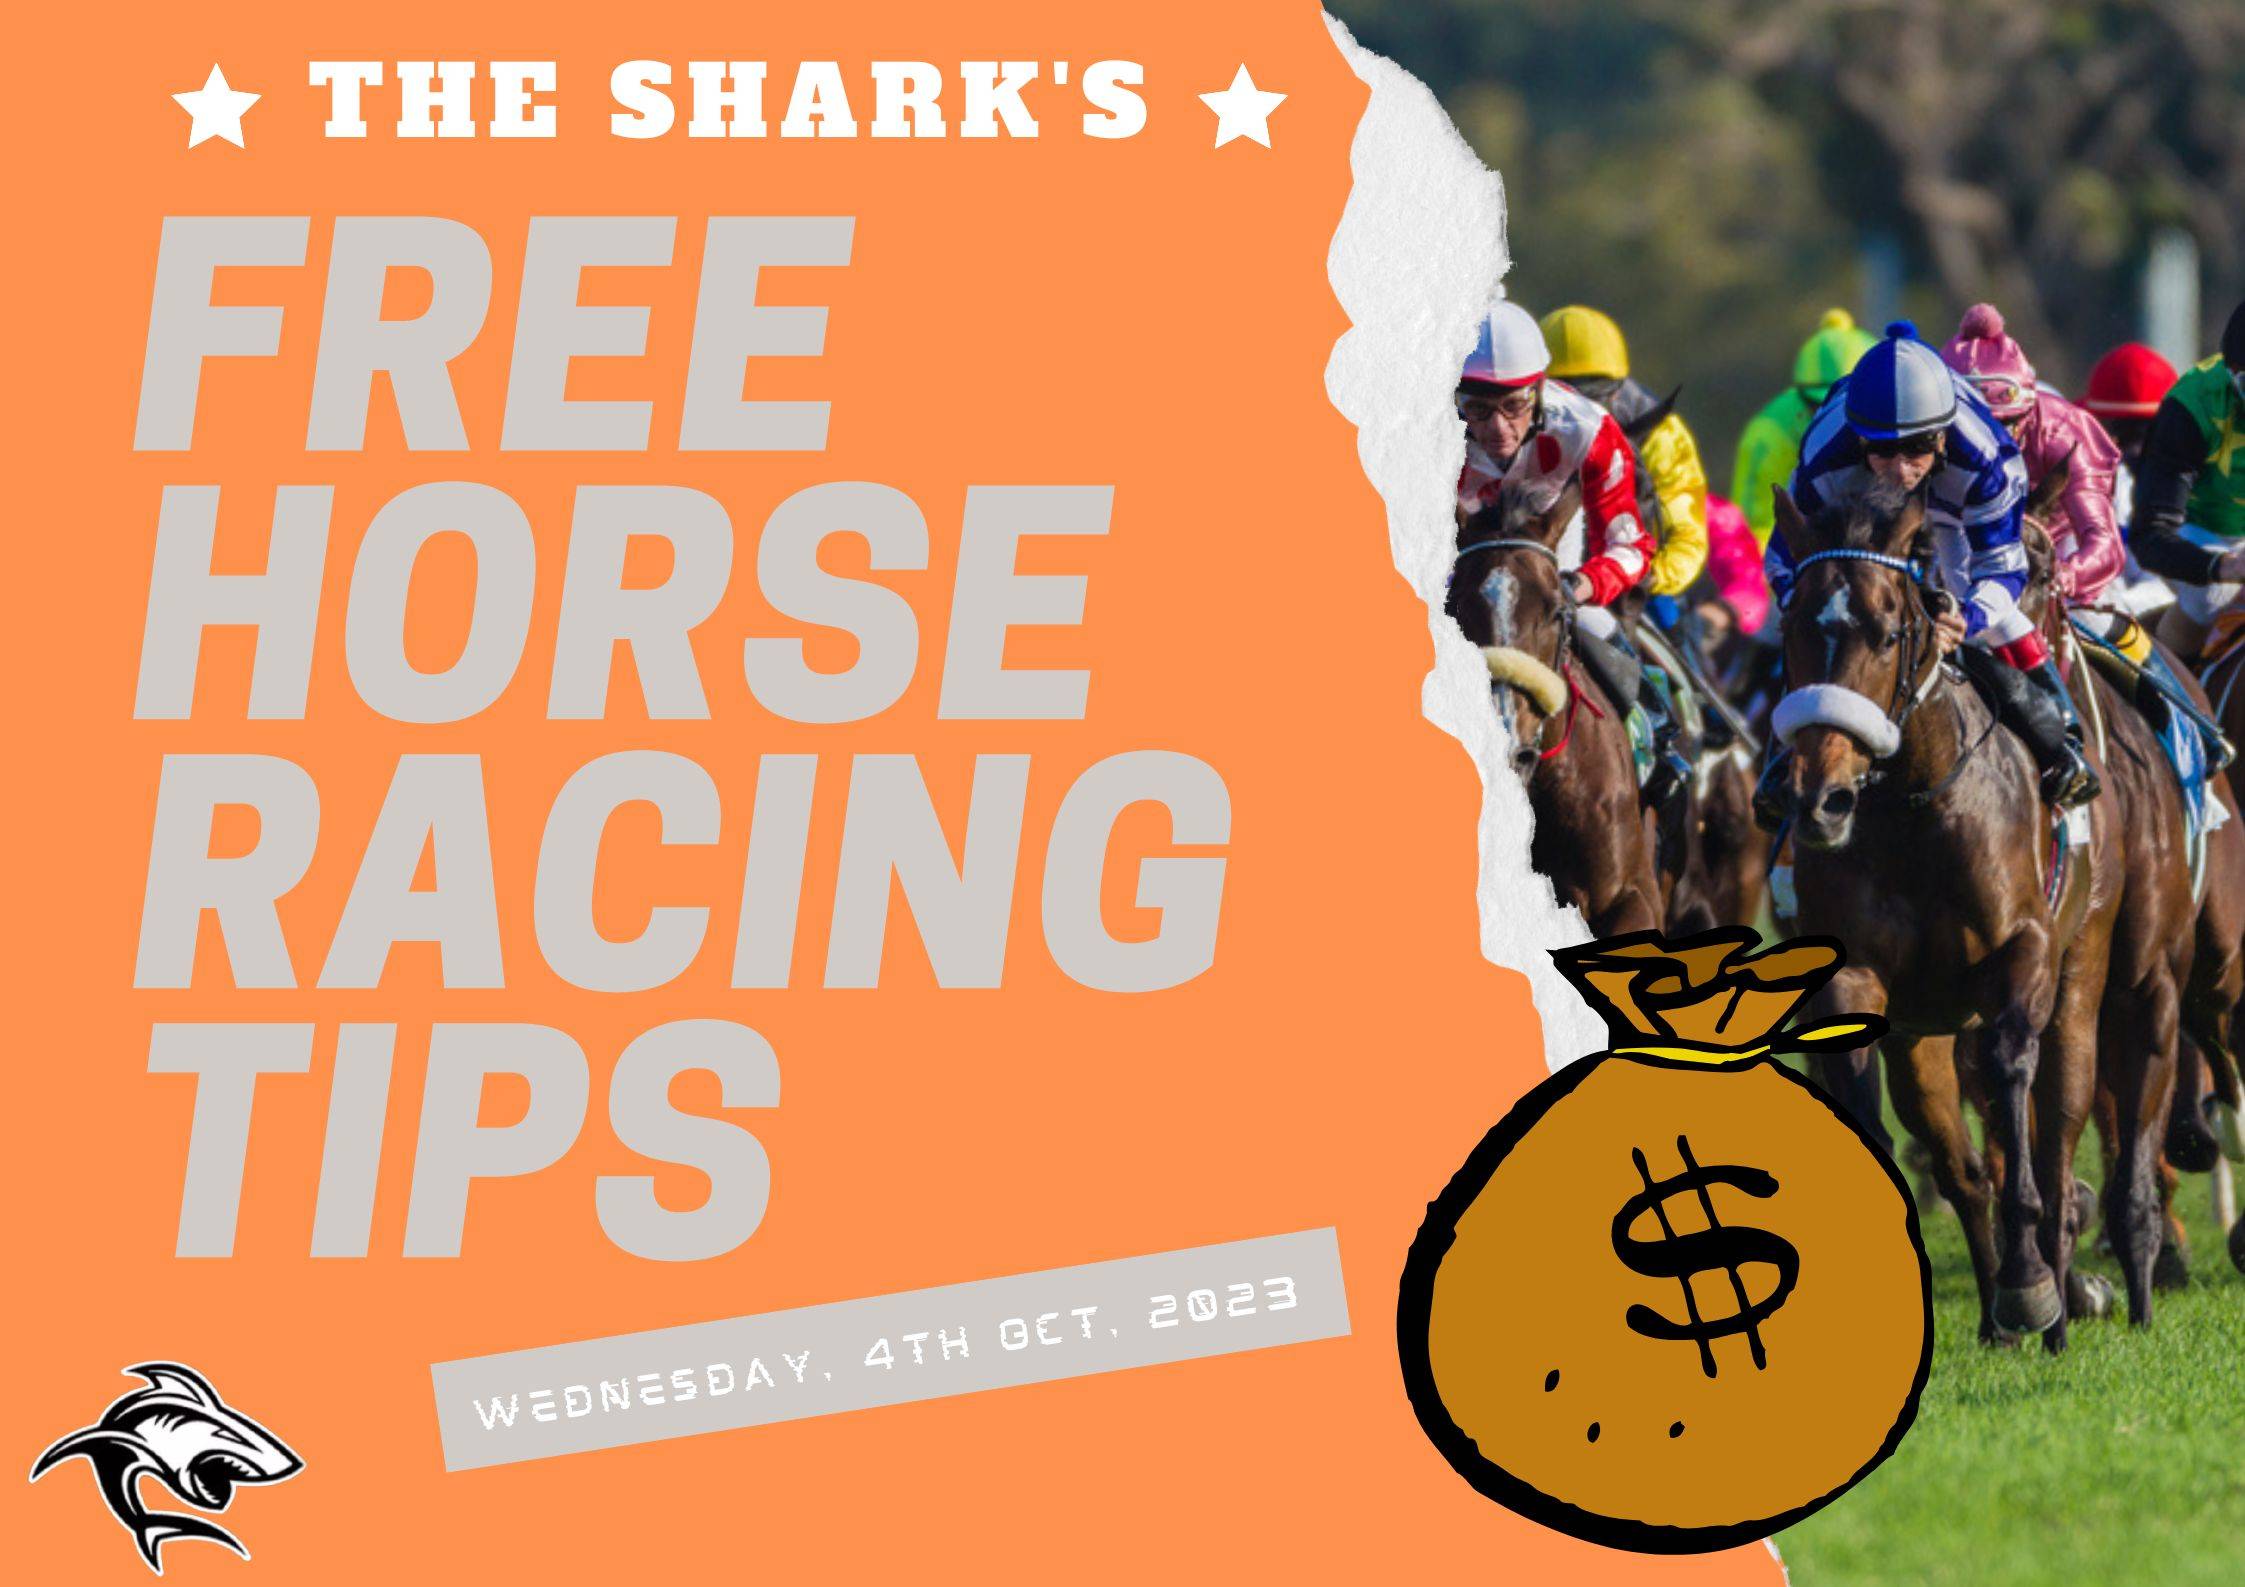 Free Horse Racing Tips - 4th Oct